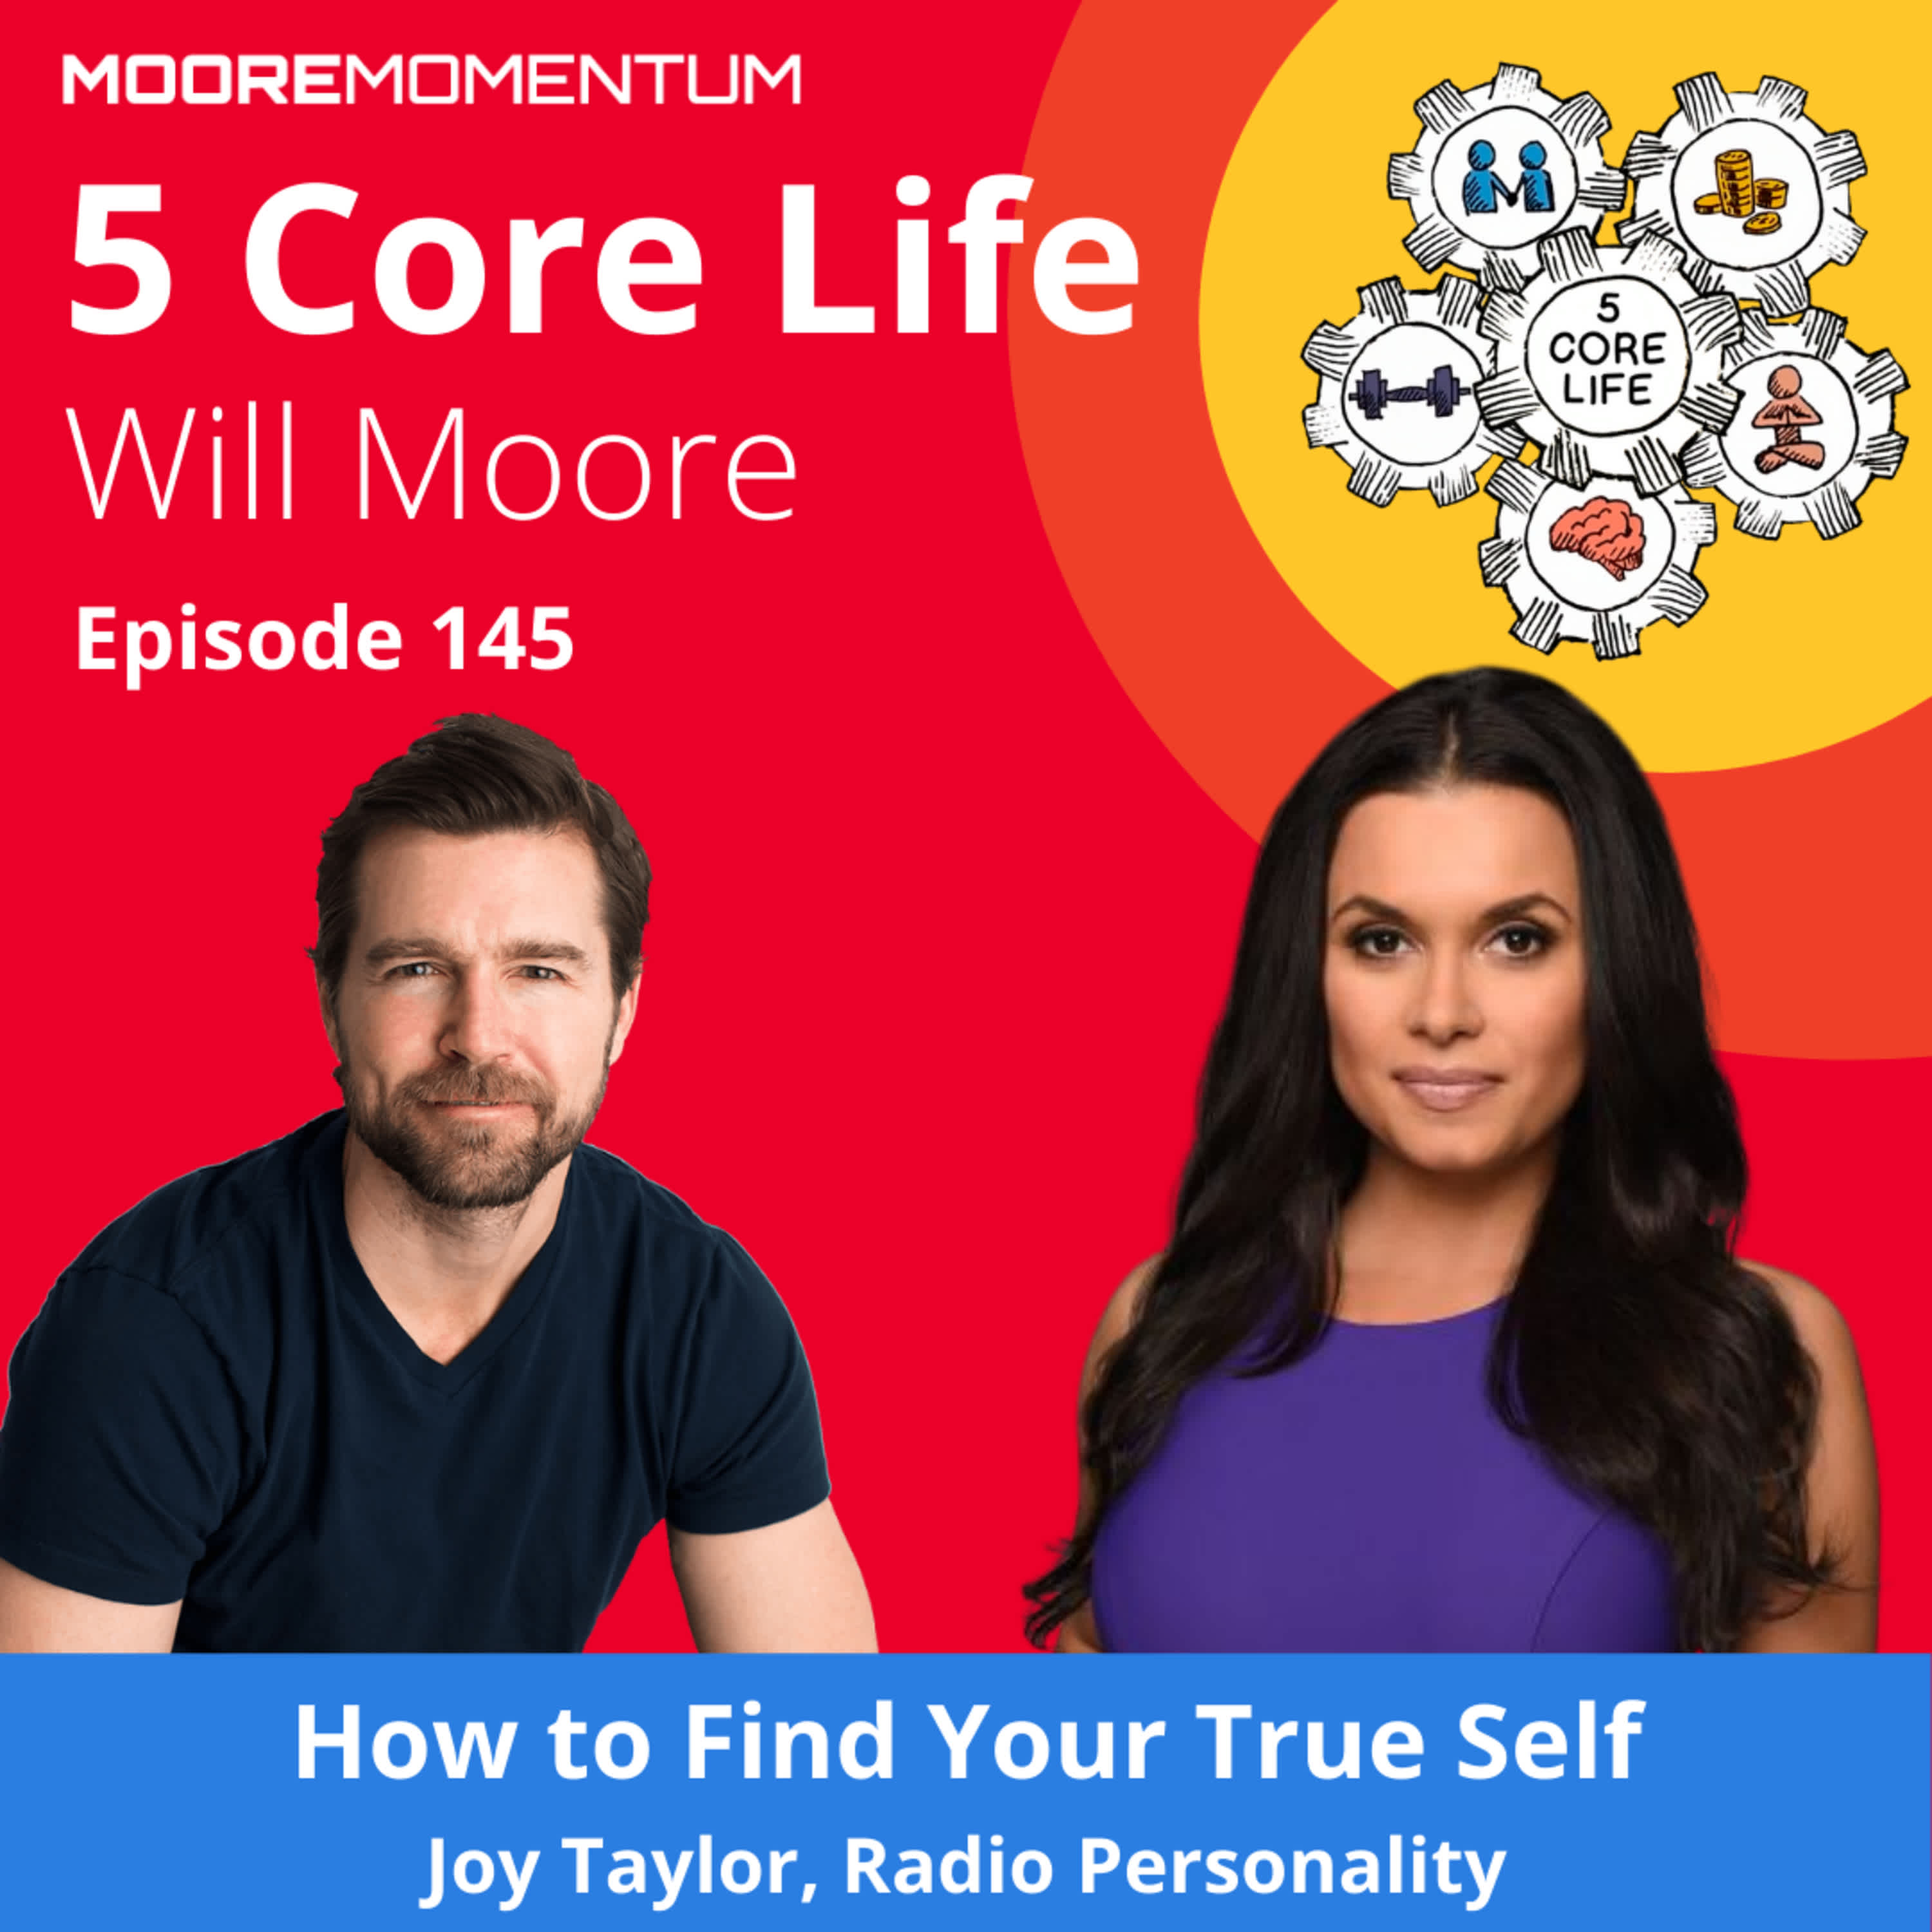 How to Find Your True Self | Joy Taylor, The Herd